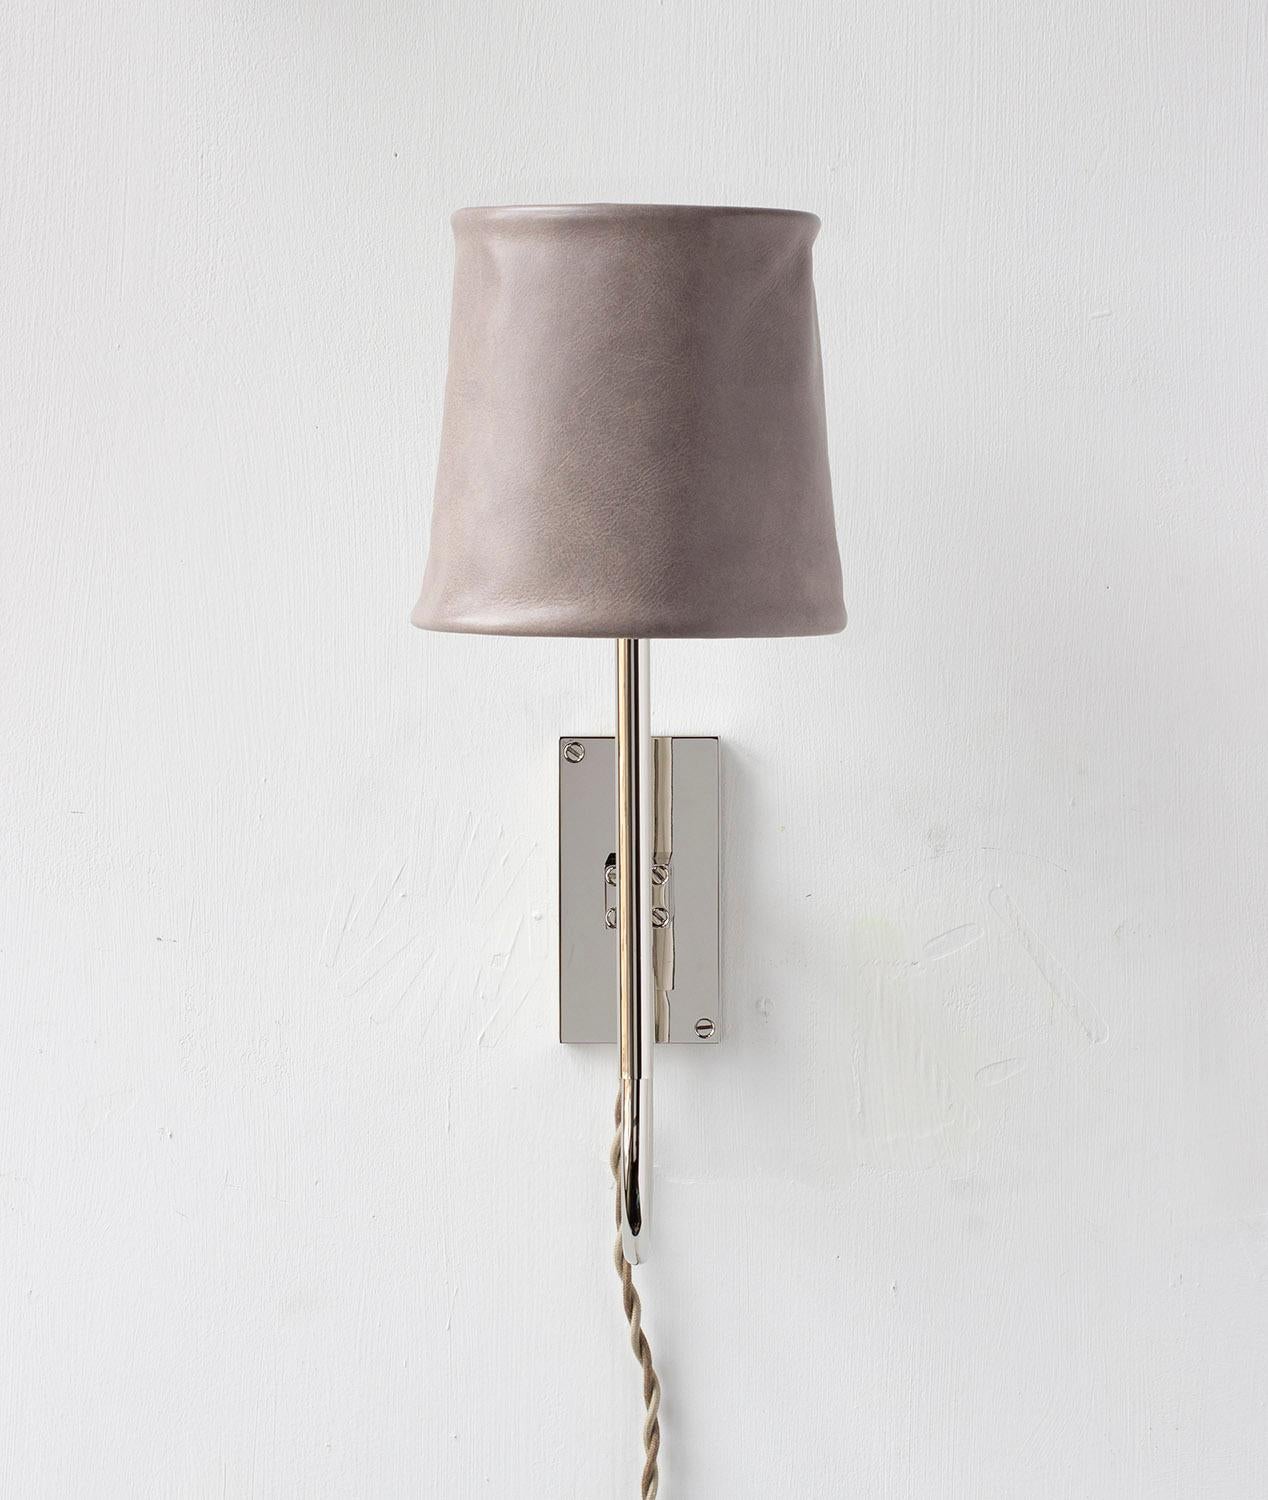 Solid machined brass in polished nickel plated finish, hand-dyed soft unstructured leather shade. All material finishes are living finishes: they will change and patina for the better with time and use. Shown with cord and plug with inline cord